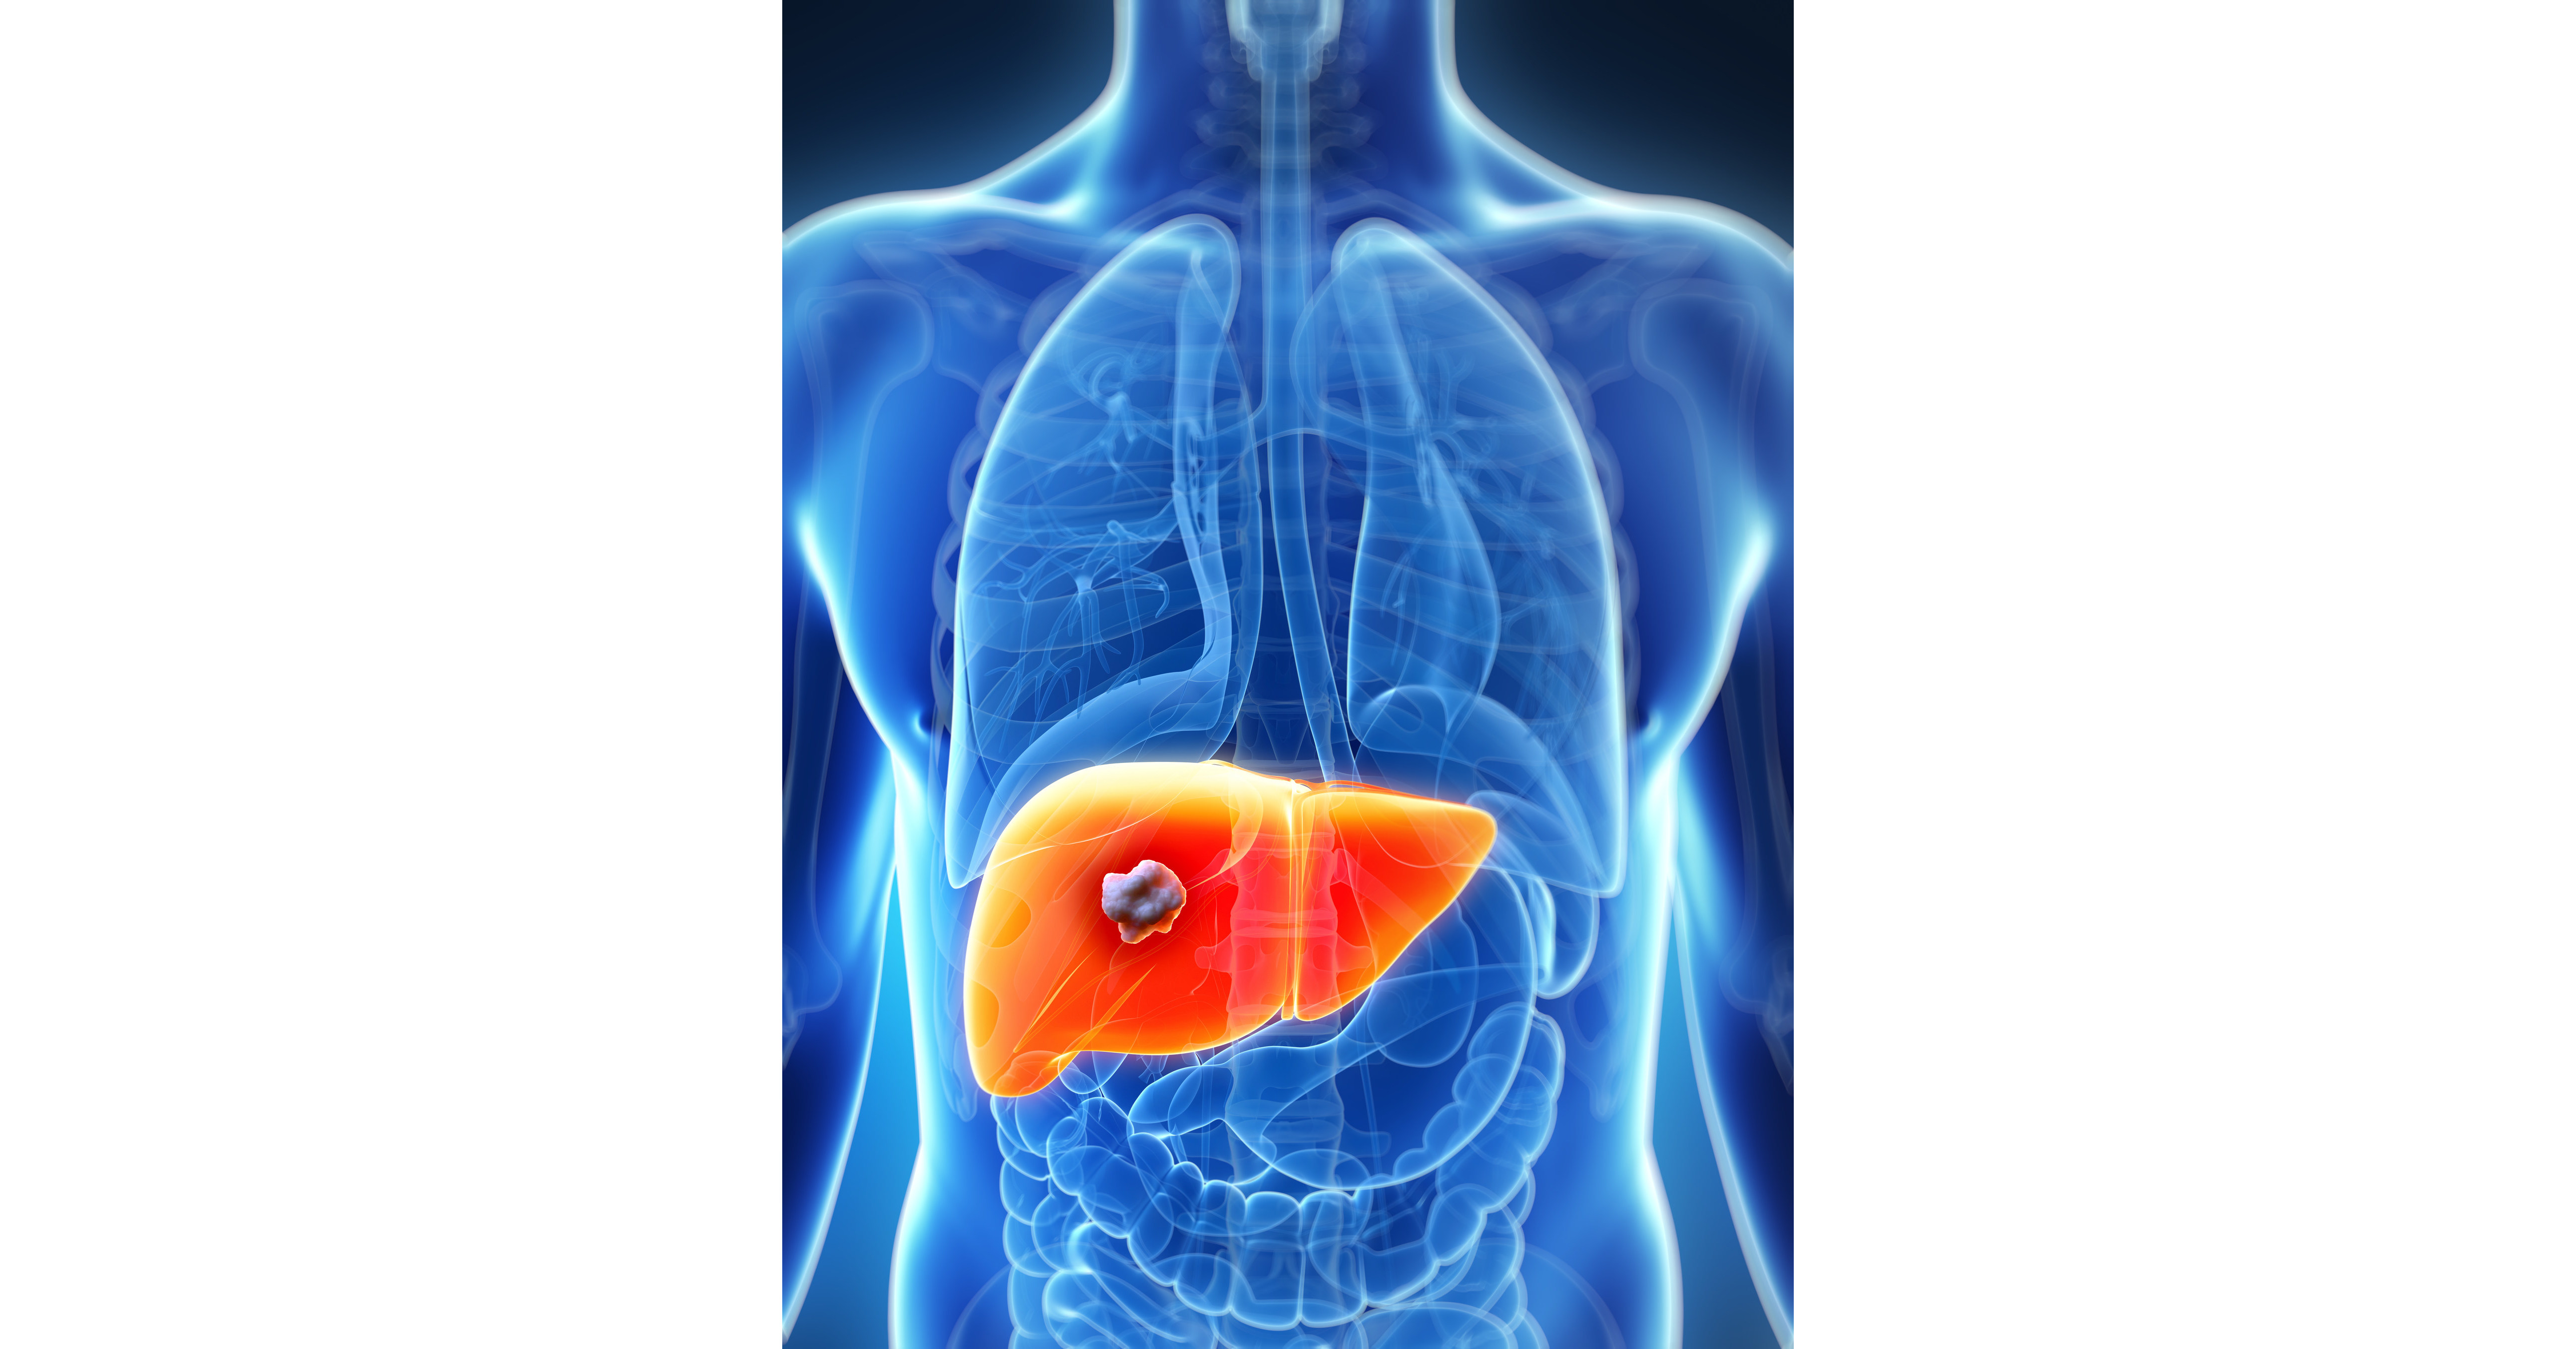 Positive Liver Cancer Detection Data Published in Cancer Discovery Shows  Further Promise of Delfi's AI Liquid Biopsy Platform